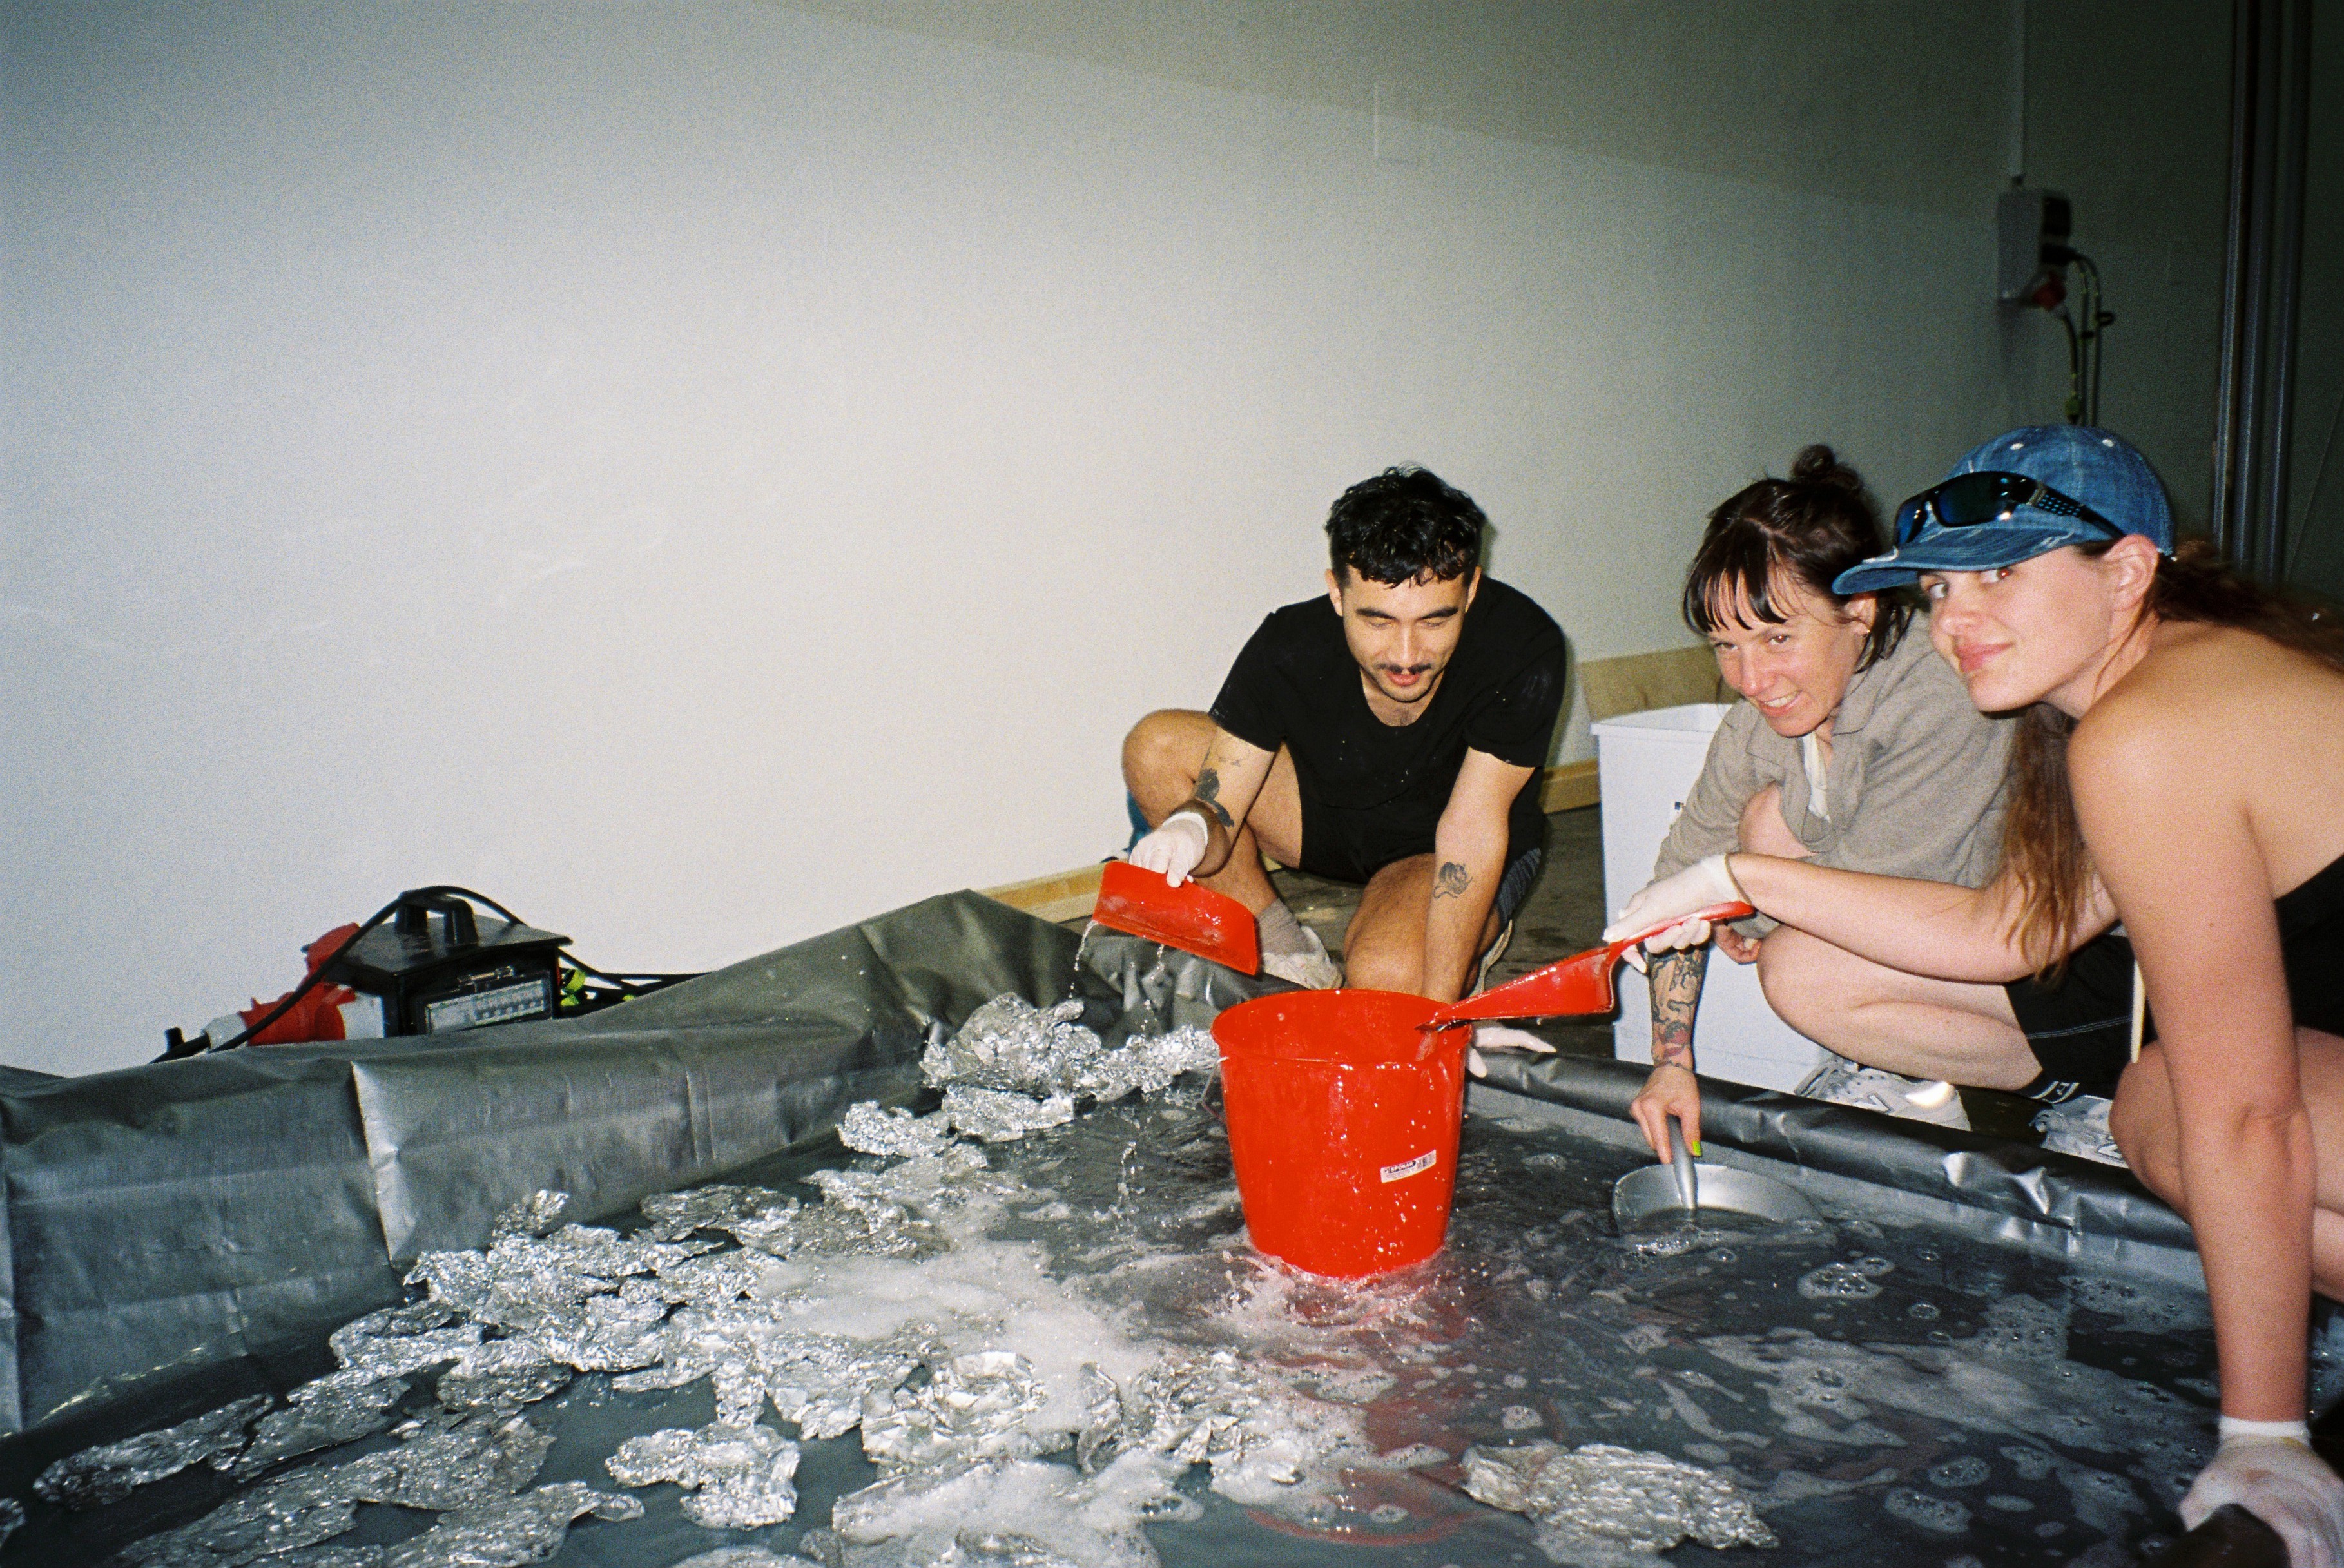 Three people scooping water out of an inflatable pool. The pool also has pieces of aluminium foil in it.